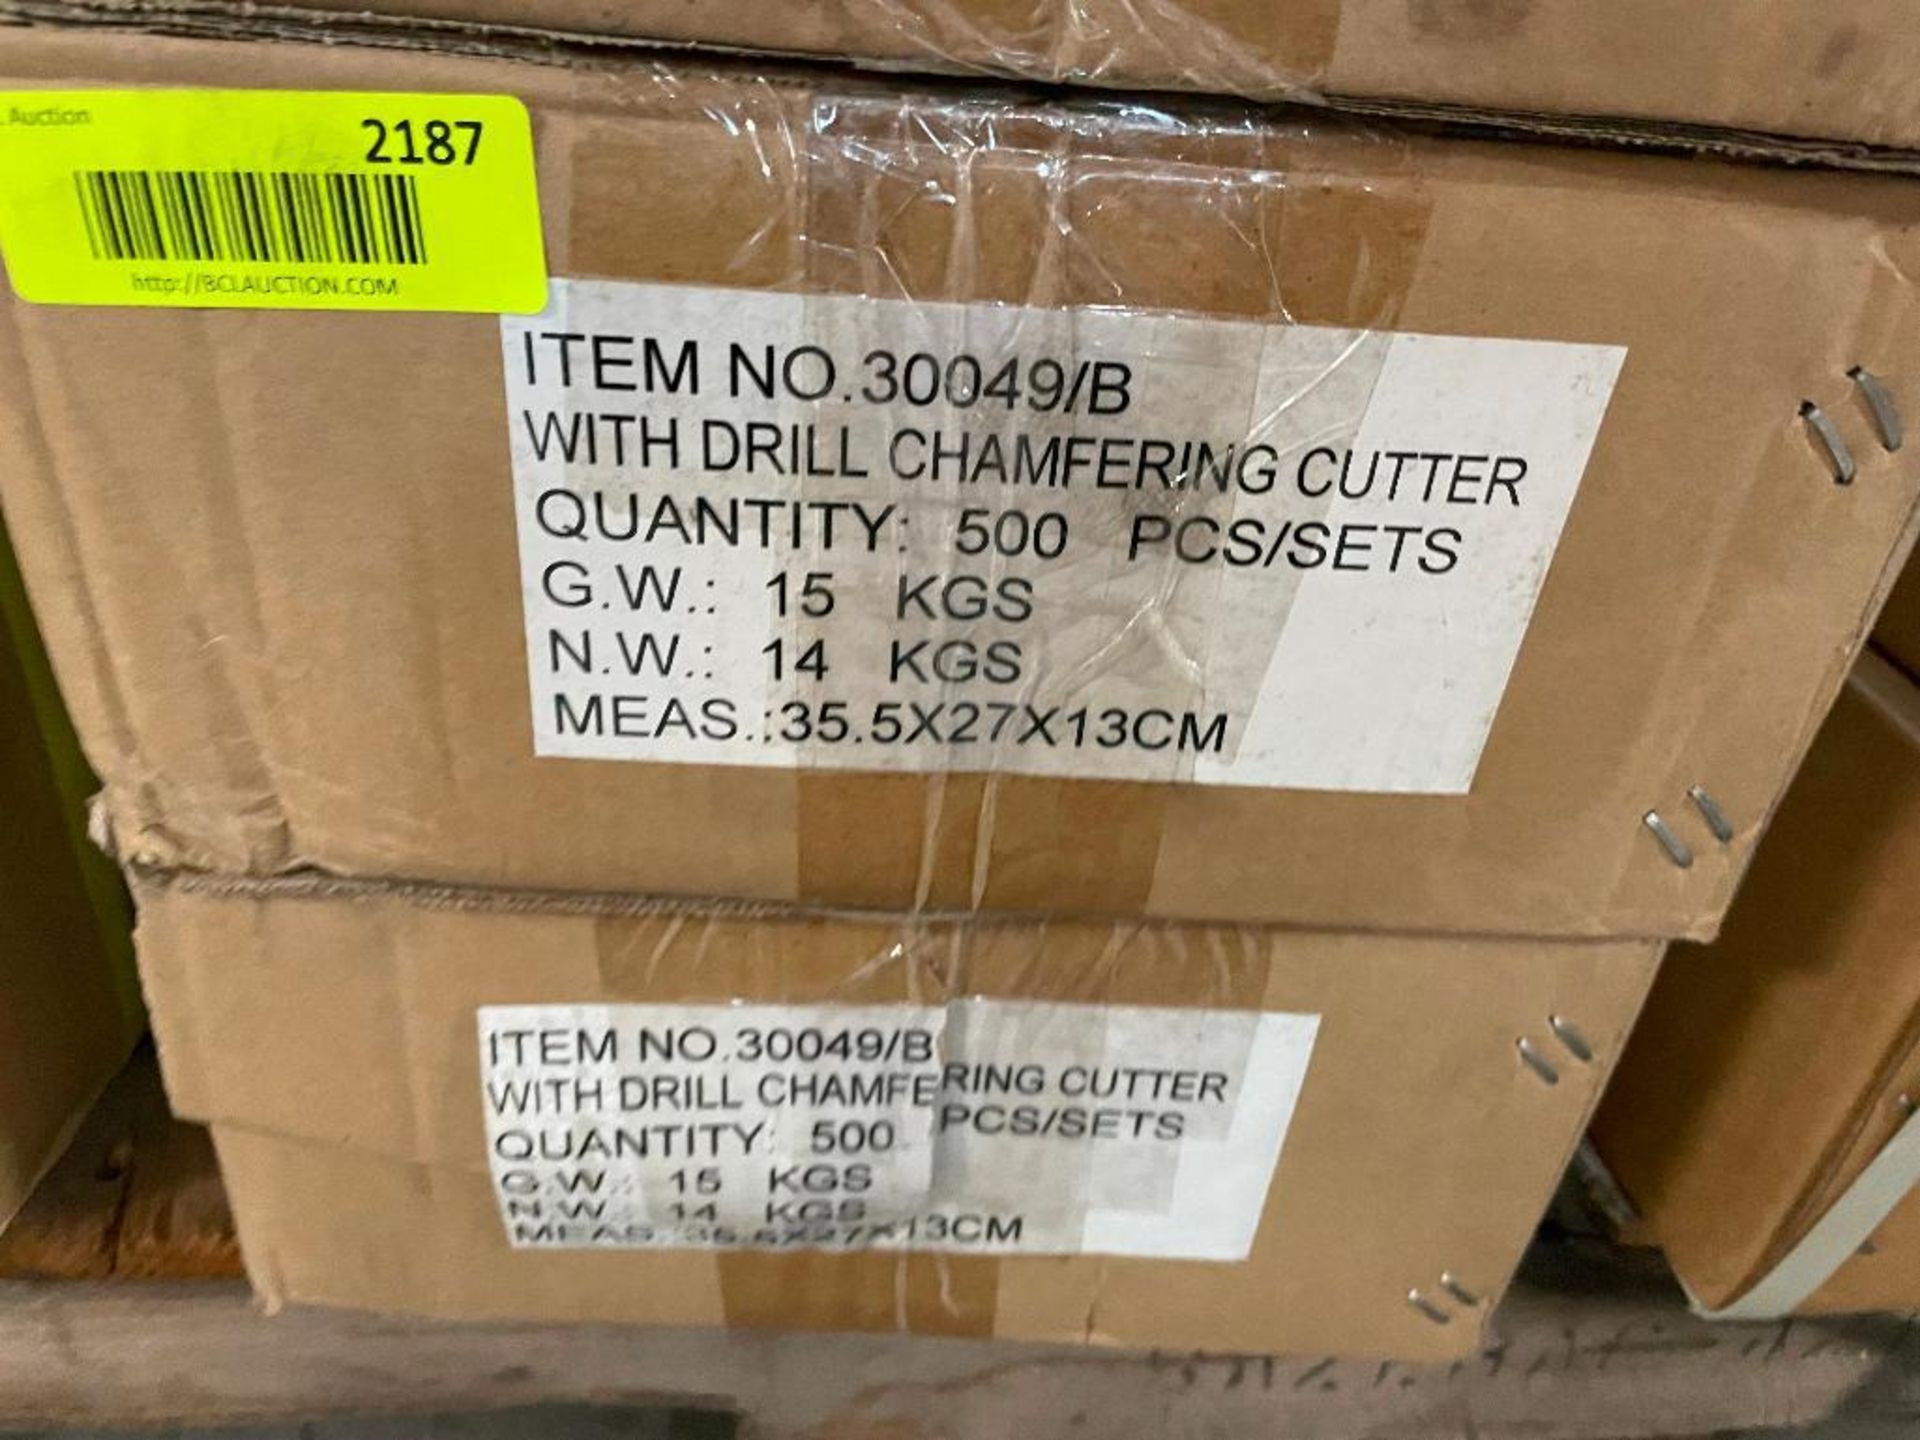 DESCRIPTION: (2) CASES OF WOOD DRILL CHAFERING CUTTER. 500 PER CASE, 1000 IN LOT BRAND / MODEL: 3004 - Image 5 of 6